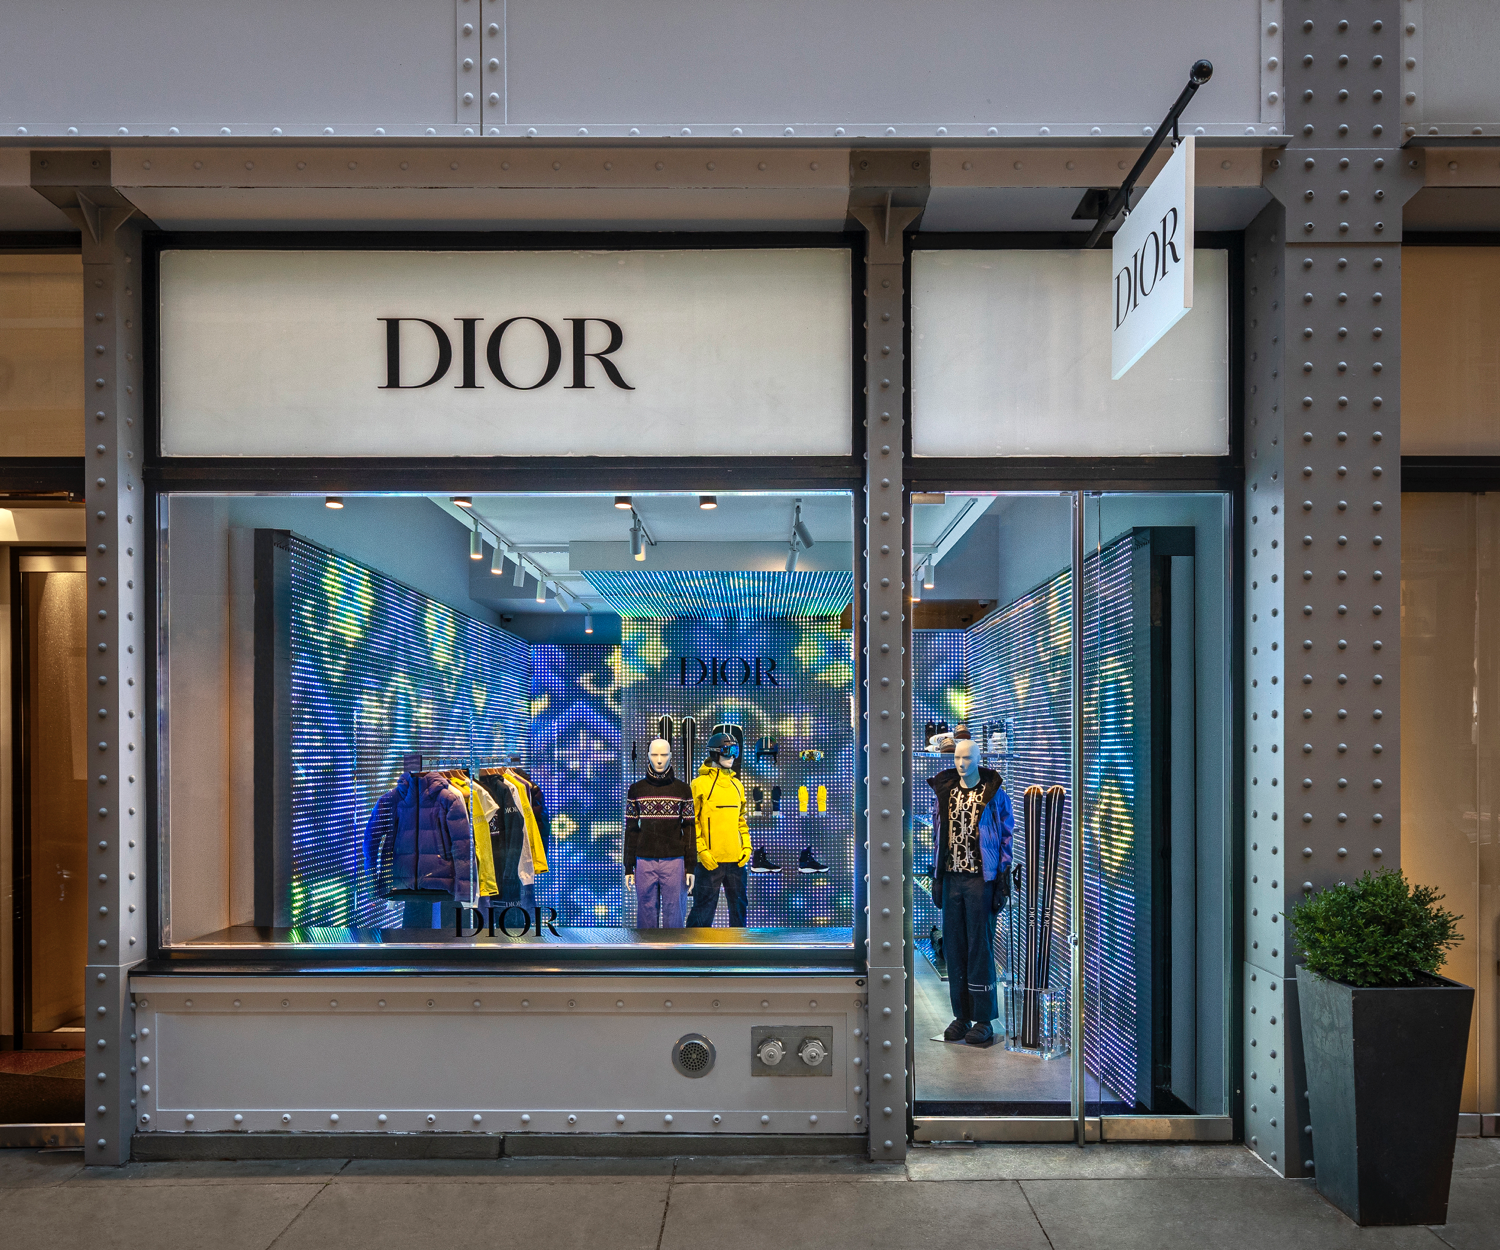 New York: Dior pop-up store